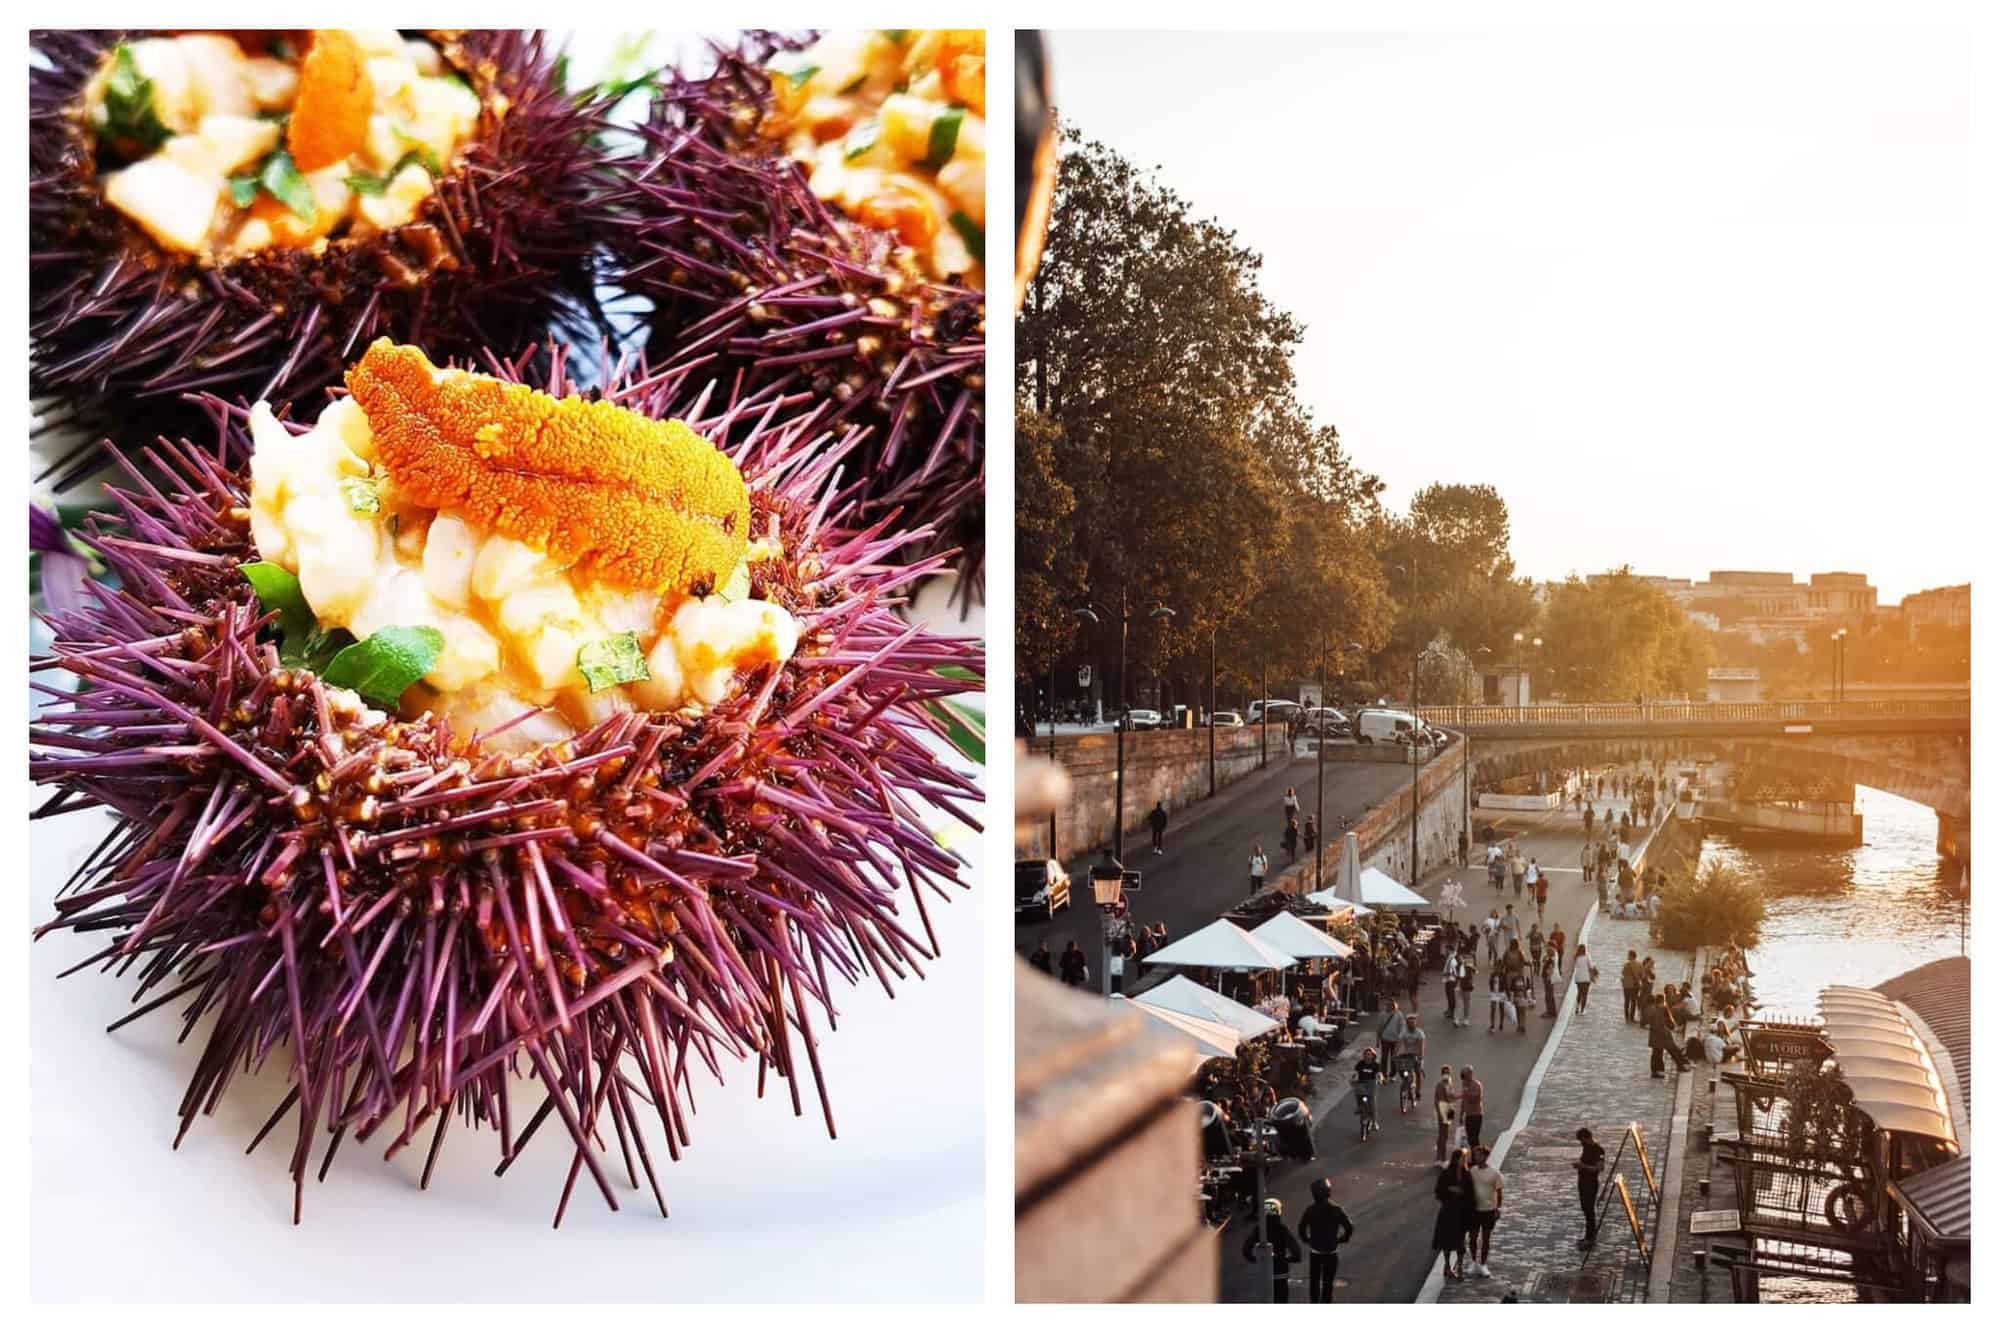 Left: a photo of the french dish oursin filled with vegetables and fish on a white plate. Right: a photo of the seine in Paris at sunset, where many people are walking along the river or dining on a terrace.